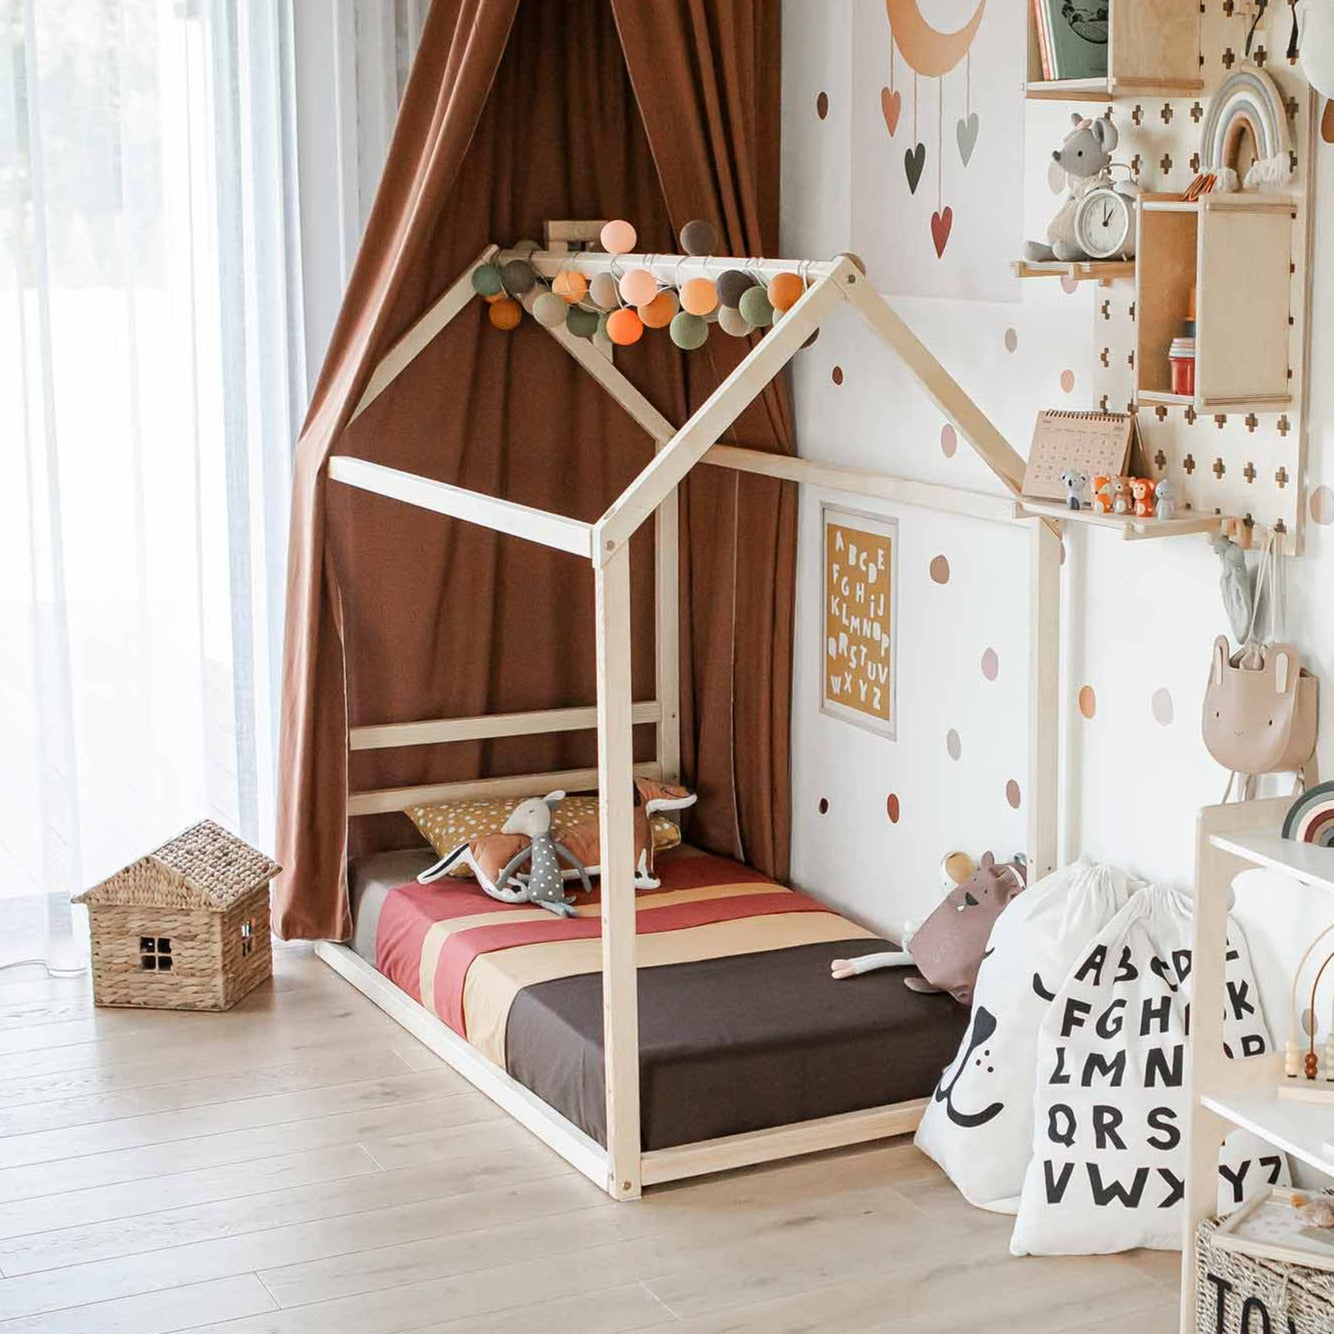 Children's house bed with a horizontal headboard